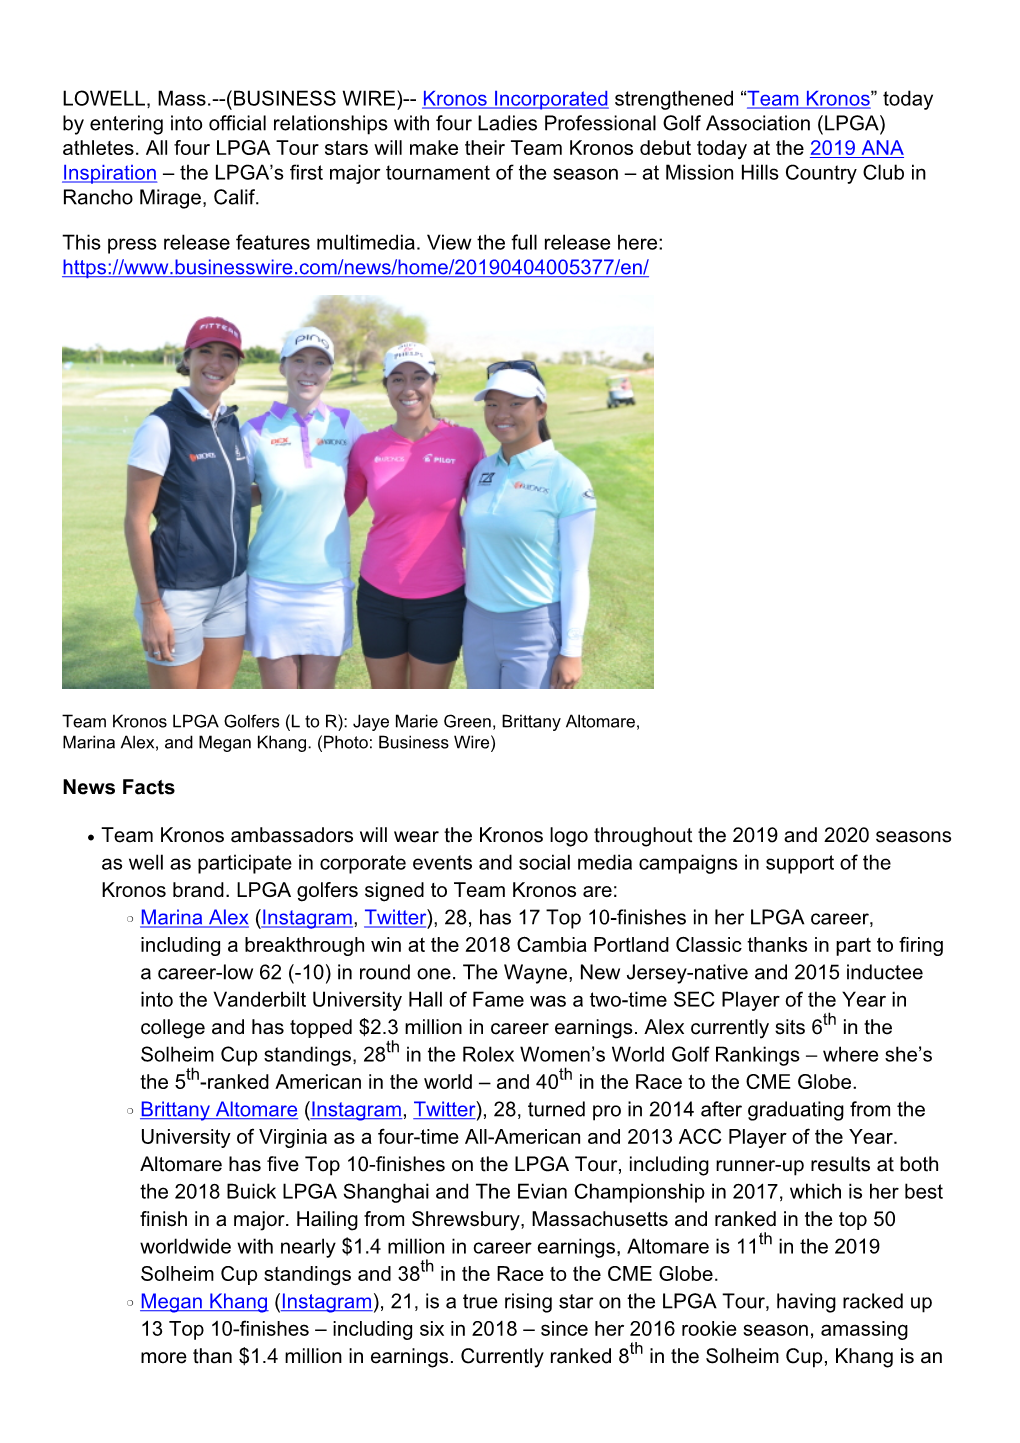 Kronos Incorporated Strengthened “Team Kronos” Today by Entering Into Official Relationships with Four Ladies Professional Golf Association (LPGA) Athletes